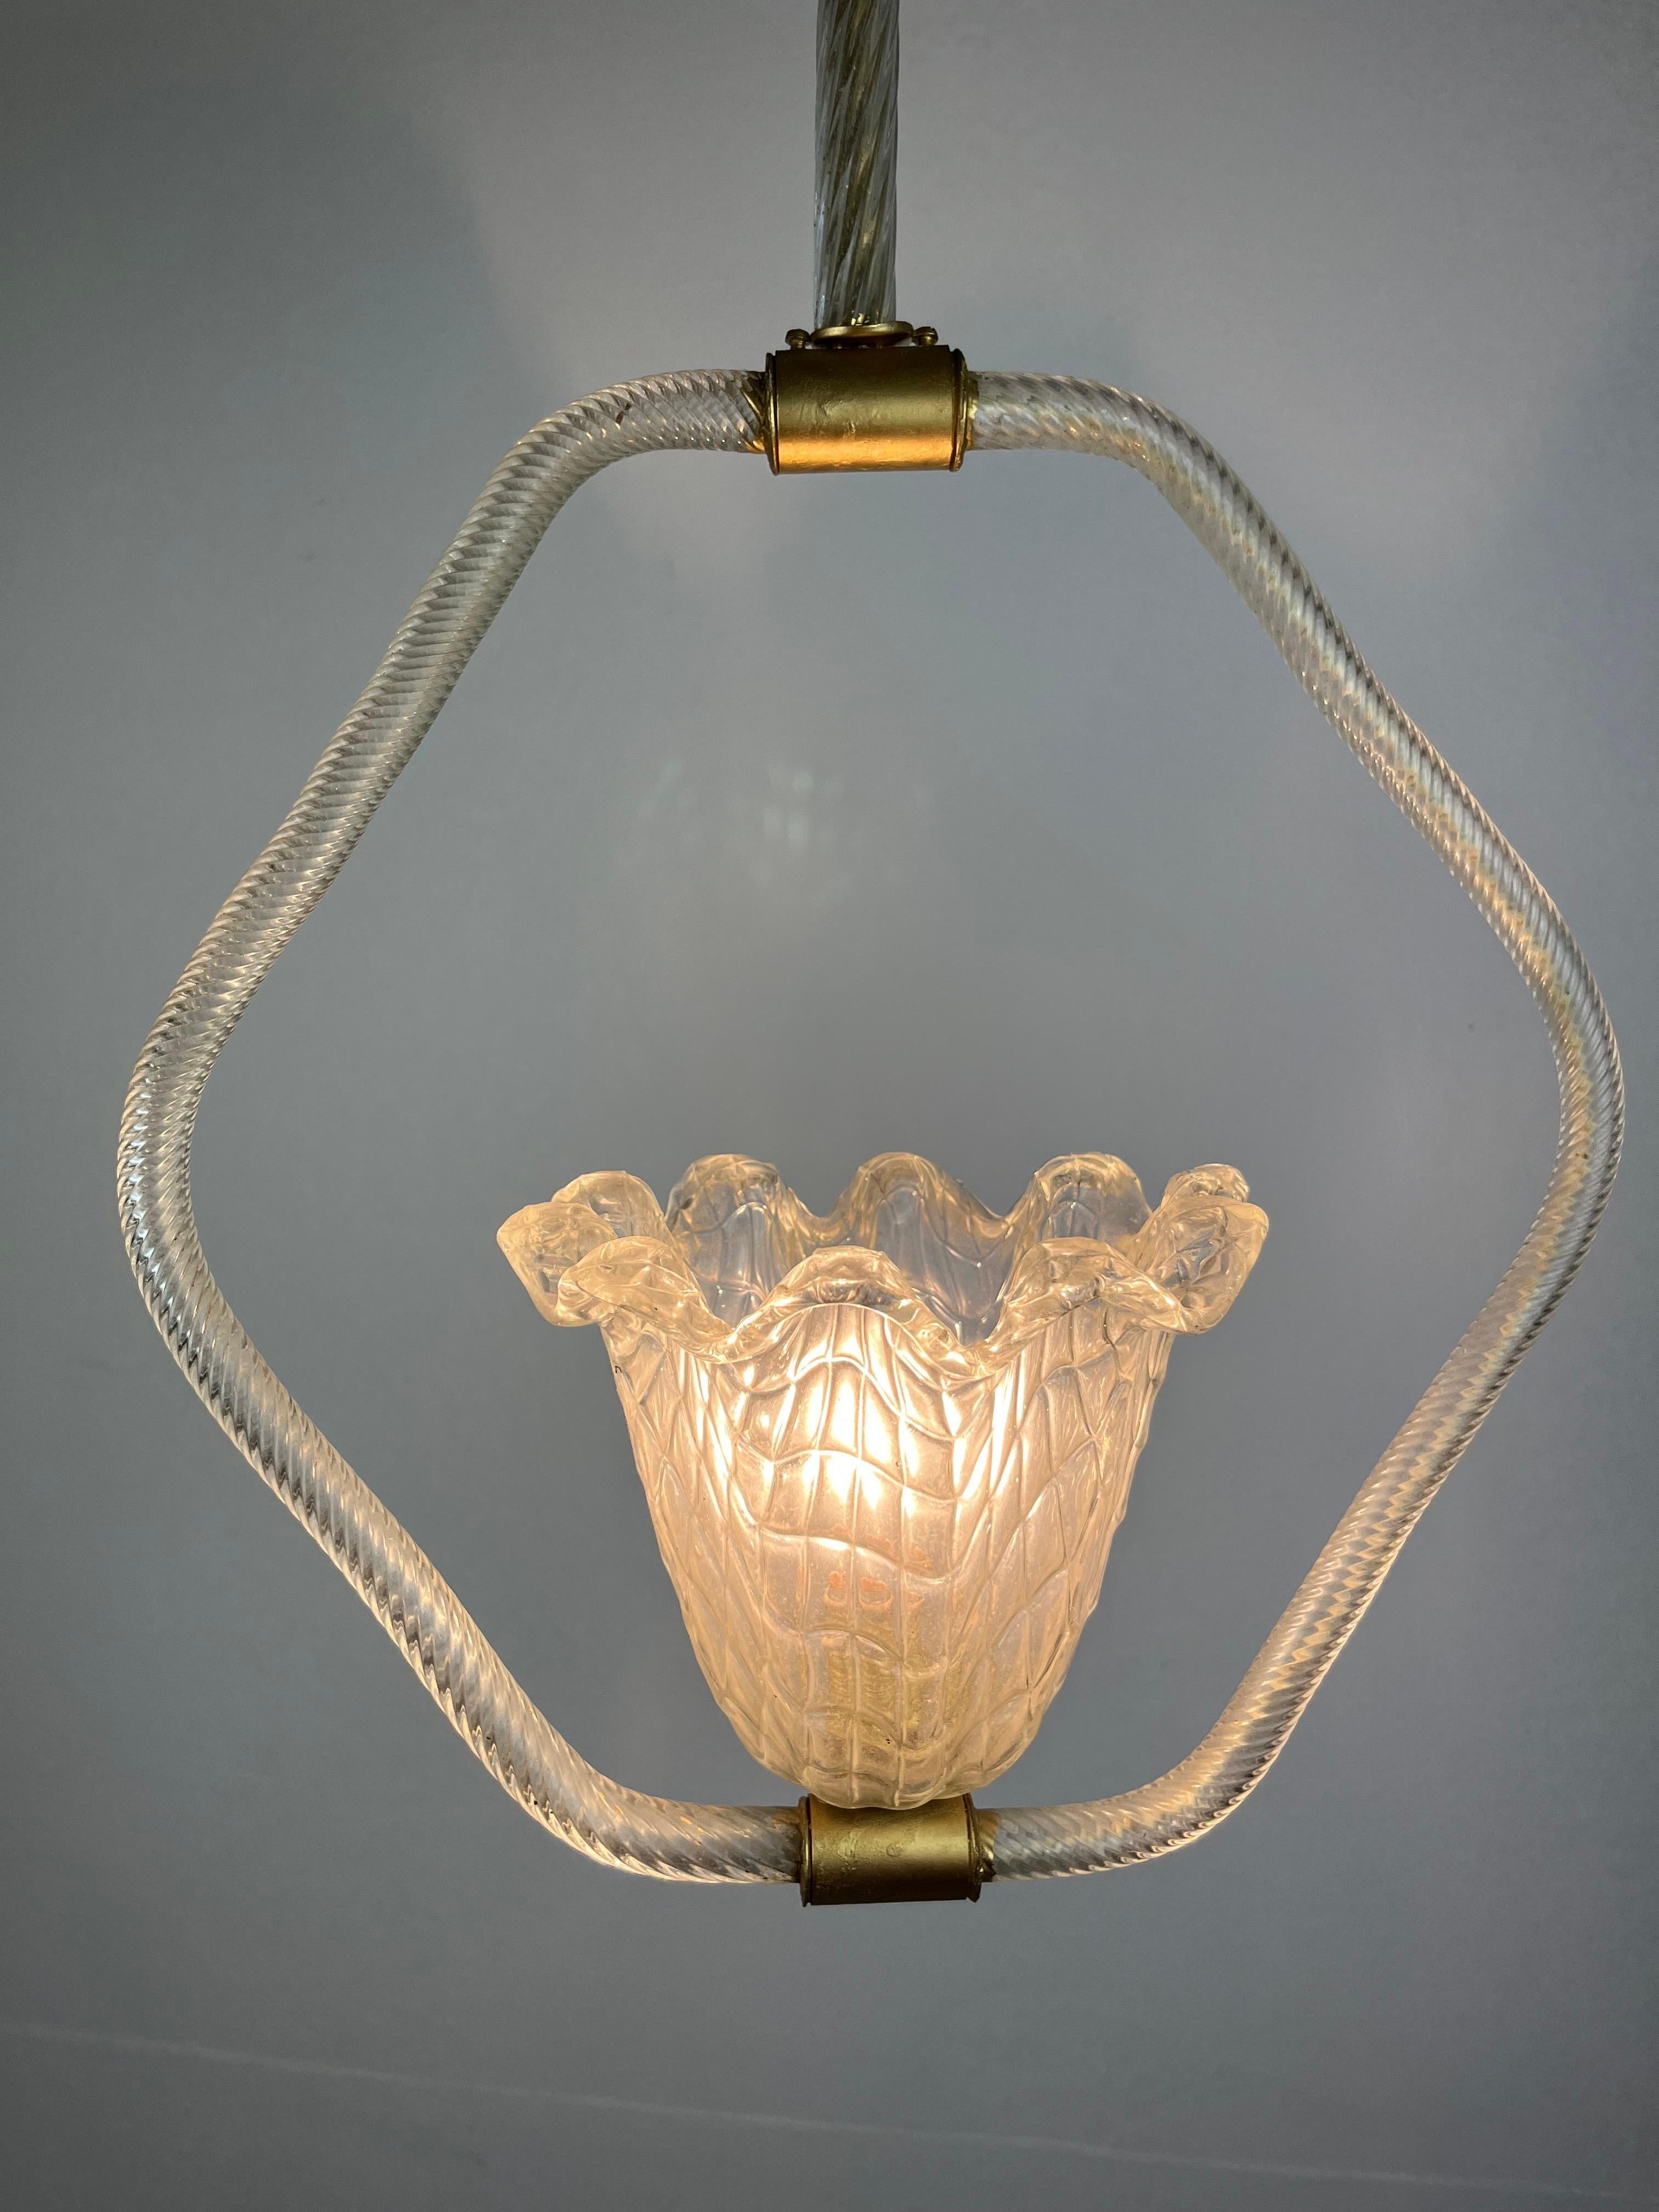 Murano Glass Chandelier, Barovier & Toso, Italy, 1940s For Sale 5